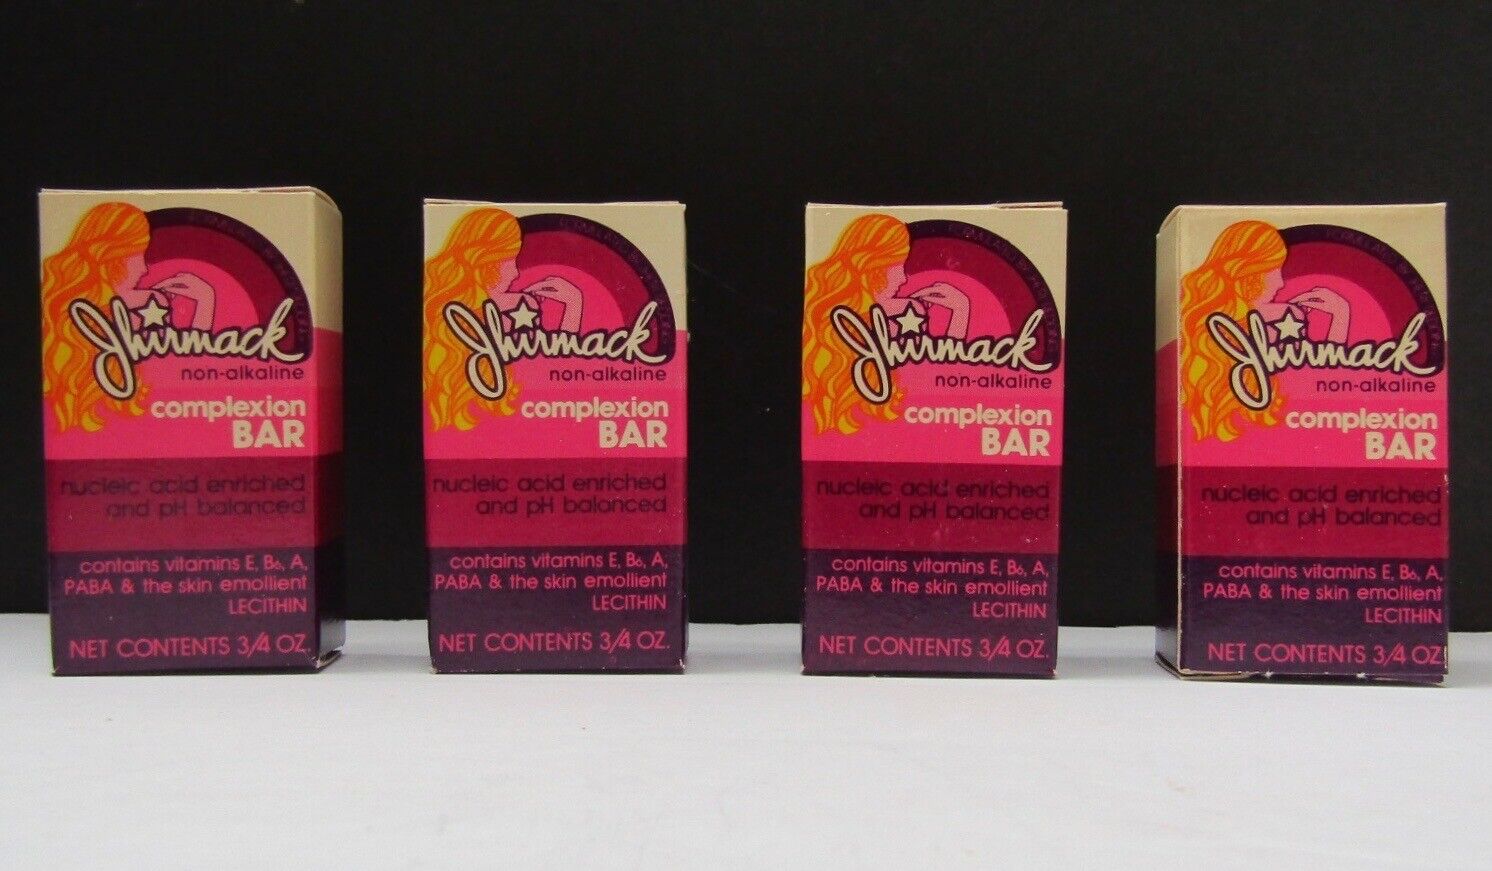 New Jhirmack Vintage 1980s Complexion Bar Soap Trial size 0.75 oz LOT of 4